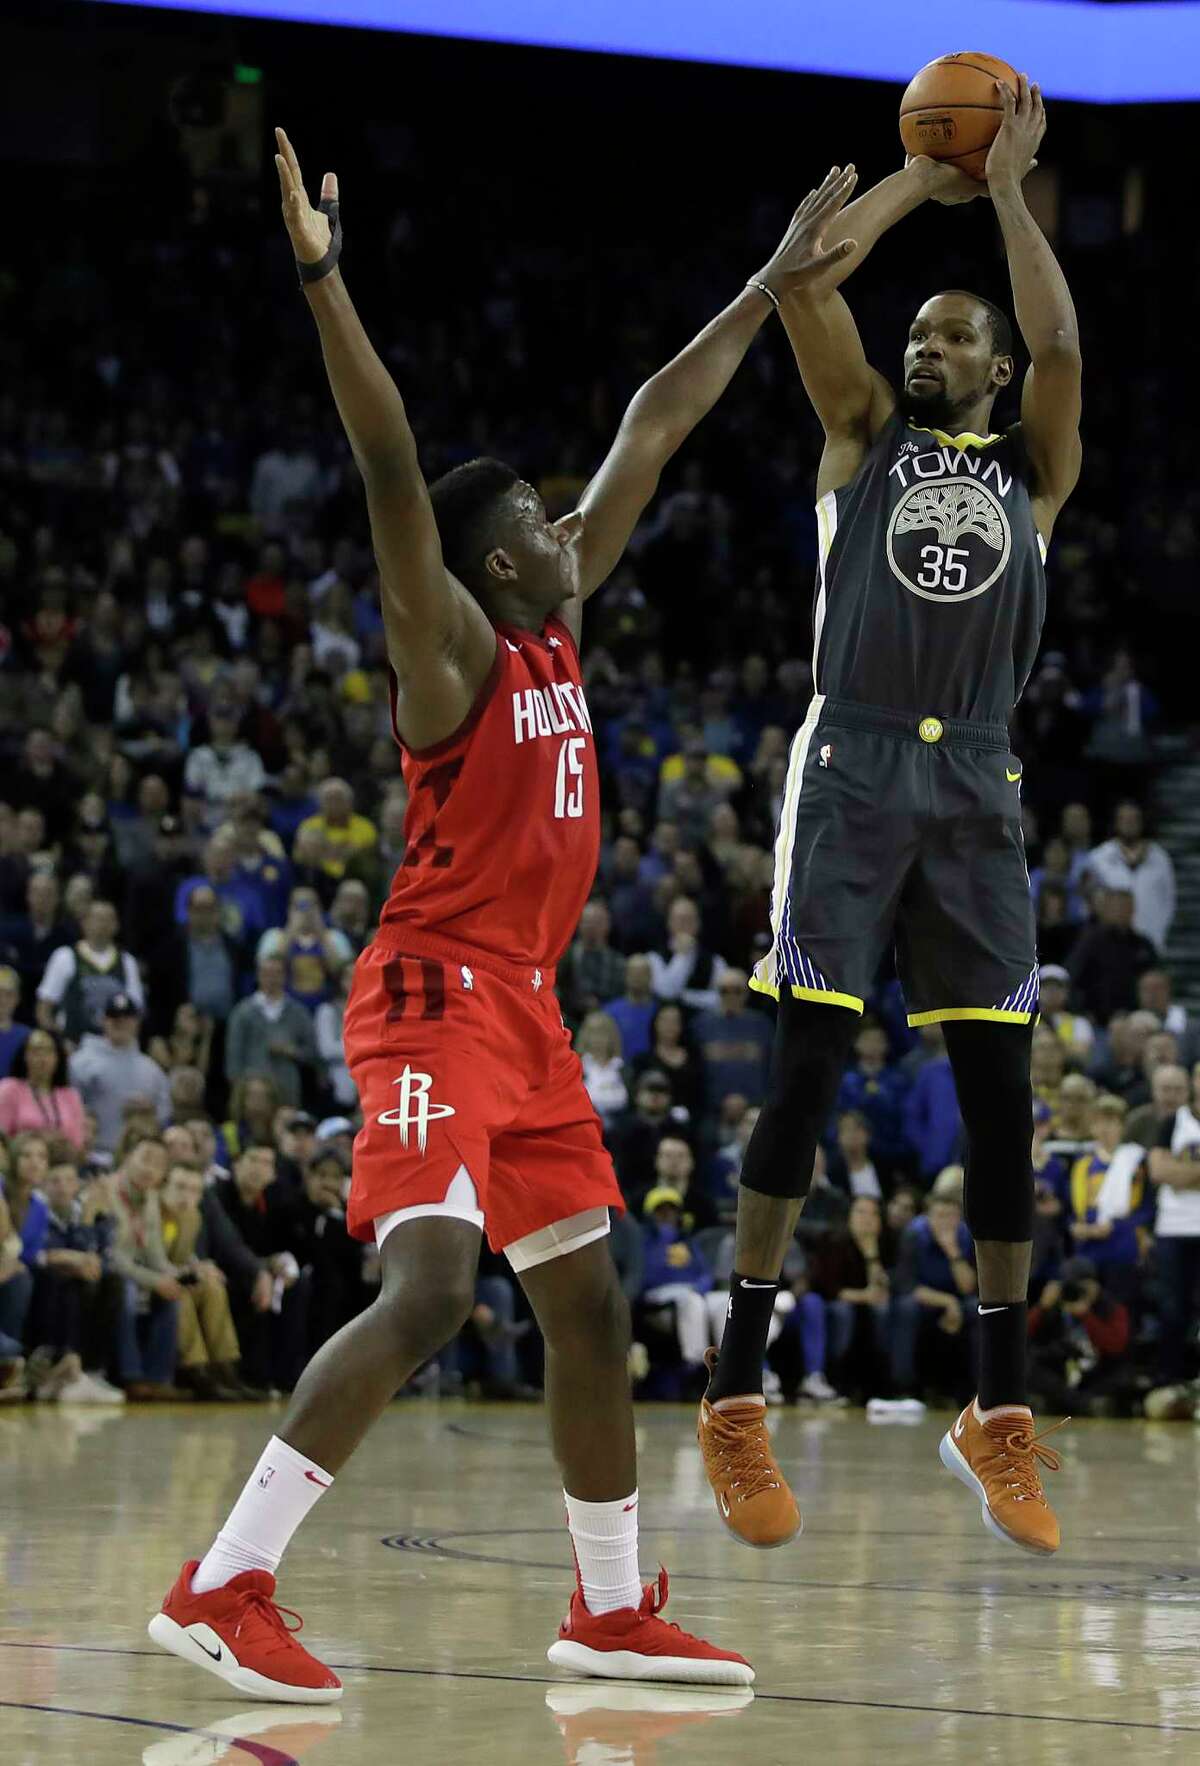 Golden State Warriors' Kevin Durant, right, shoots over Houston Rockets' Clint Capela, left, in the second half of an NBA basketball game Saturday, Feb. 23, 2019, in Oakland, Calif. (AP Photo/Ben Margot)